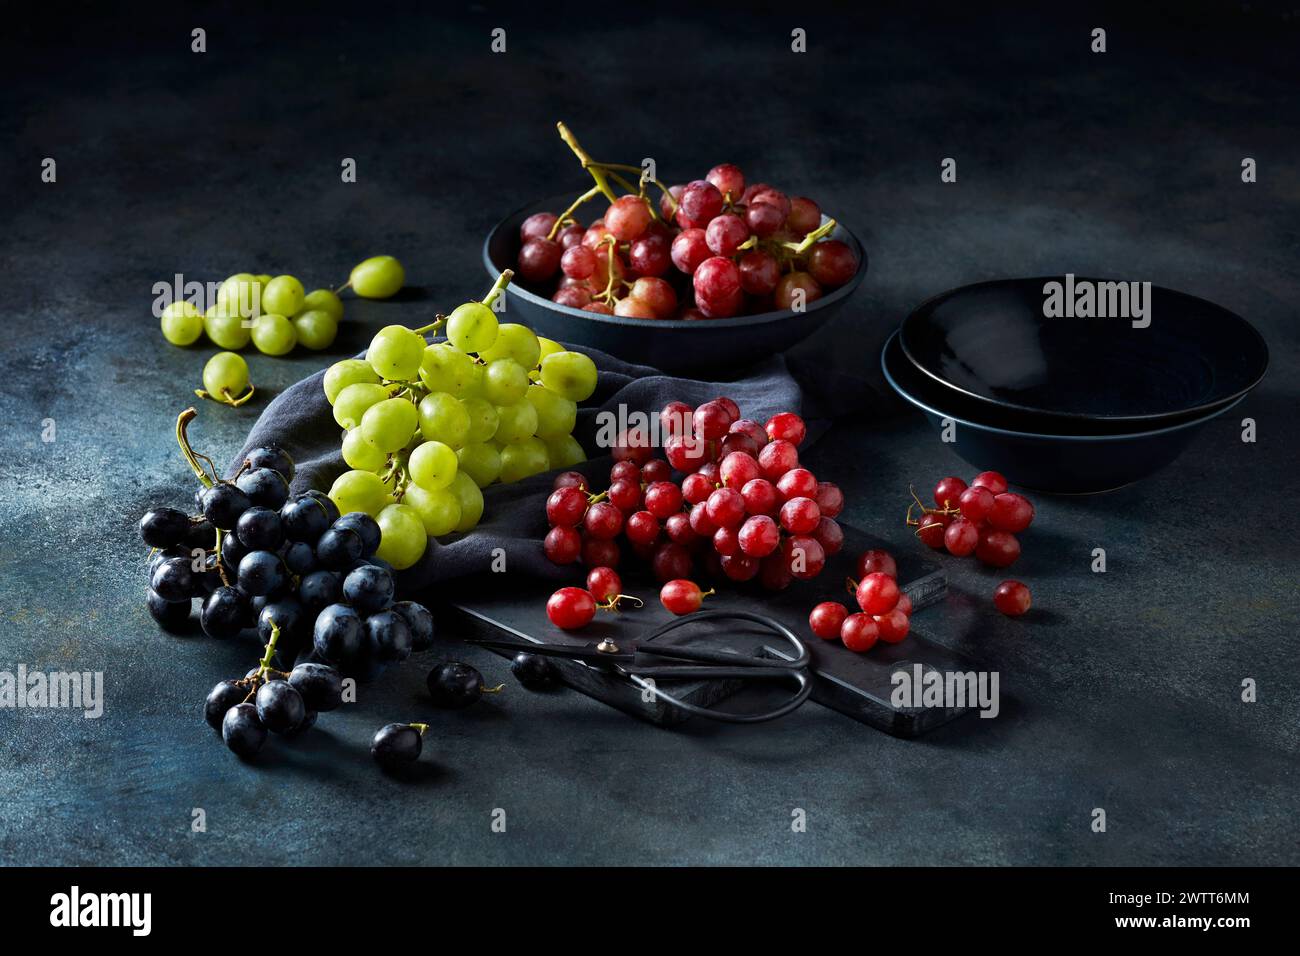 Assorted fresh grapes on rustic kitchen table Stock Photo